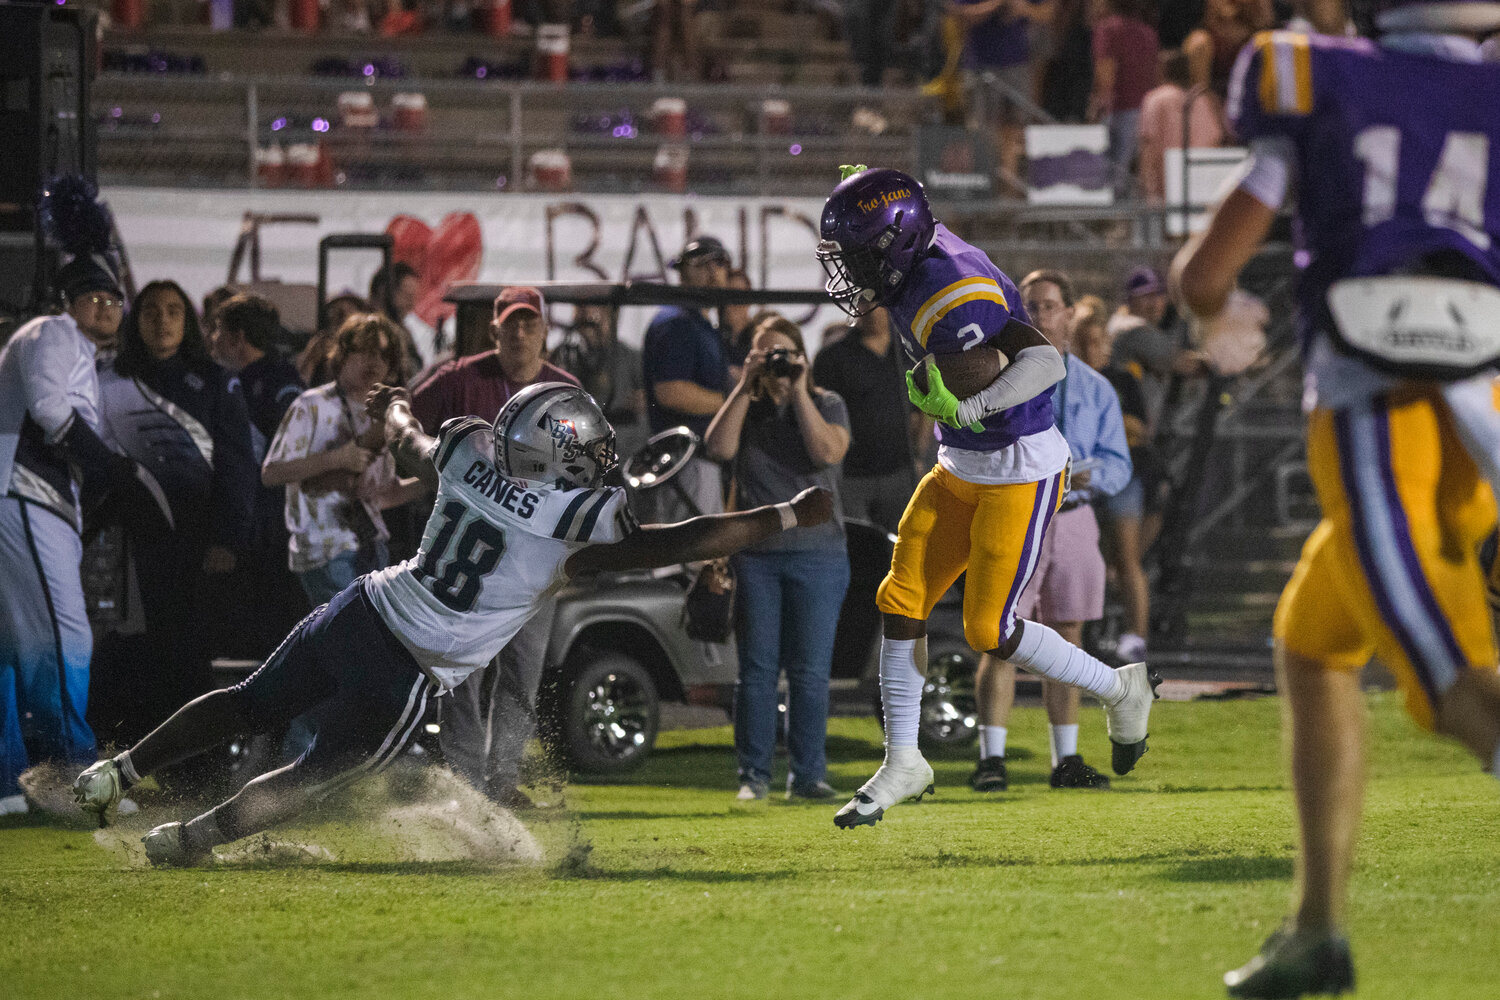 Daphne sophomore Jaecyn Myles puts the breaks on to avoid Alma-Bryant junior Jonavan Billups en route to the end zone during the Trojans’ Class 7A Region 1 opening win over the Hurricanes on Sept. 8 at Jubilee Stadium. In Friday’s win over Davidson, Myles registered 75 receiving yards and two touchdowns as well as provided a 71-yard punt return for a touchdown.